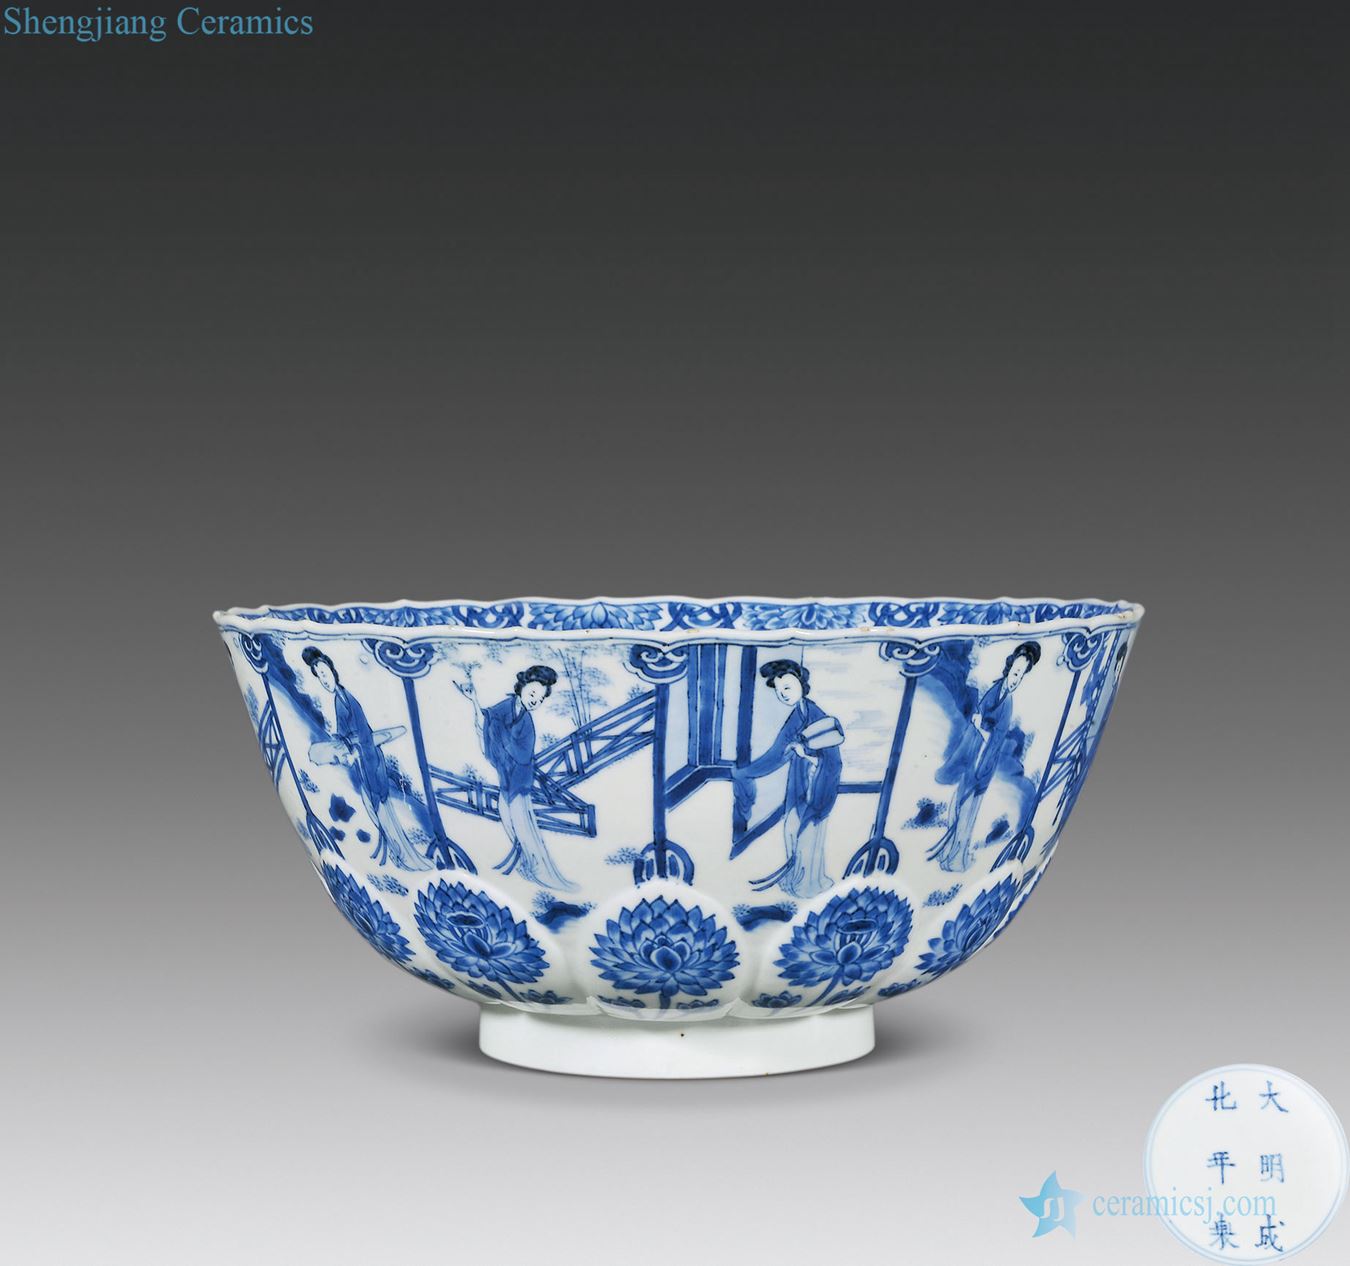 The qing emperor kangxi Blue and white had a lotus-shaped bowl